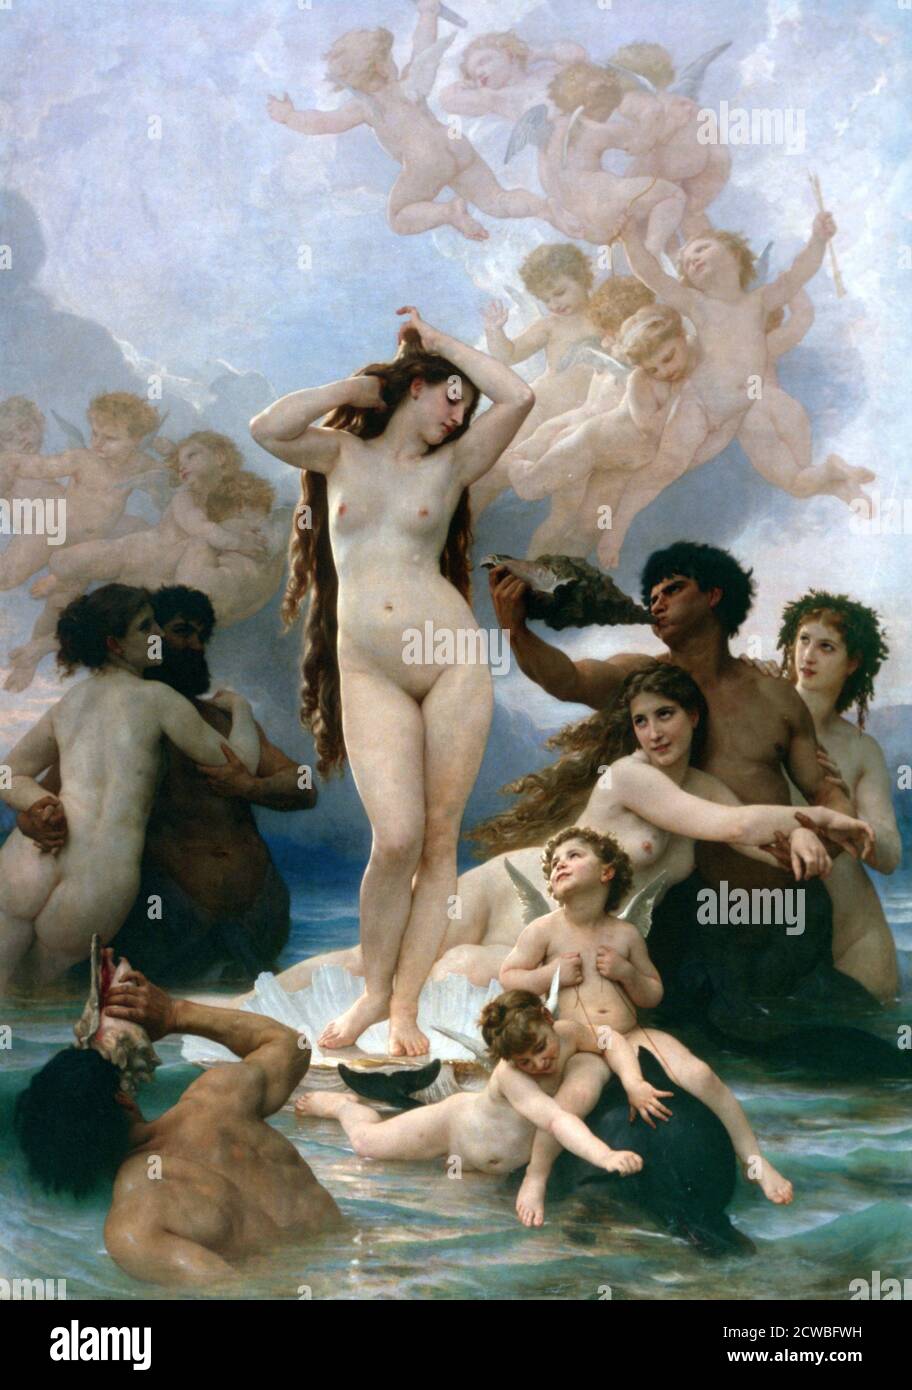 The Birth of Venus', 1879. Artist: William-Adolphe Bouguereau. William-Adolphe Bouguereau (1825-1905) was a French academic painter. In his realistic genre paintings he used mythological themes, making modern interpretations of classical subjects. Stock Photo